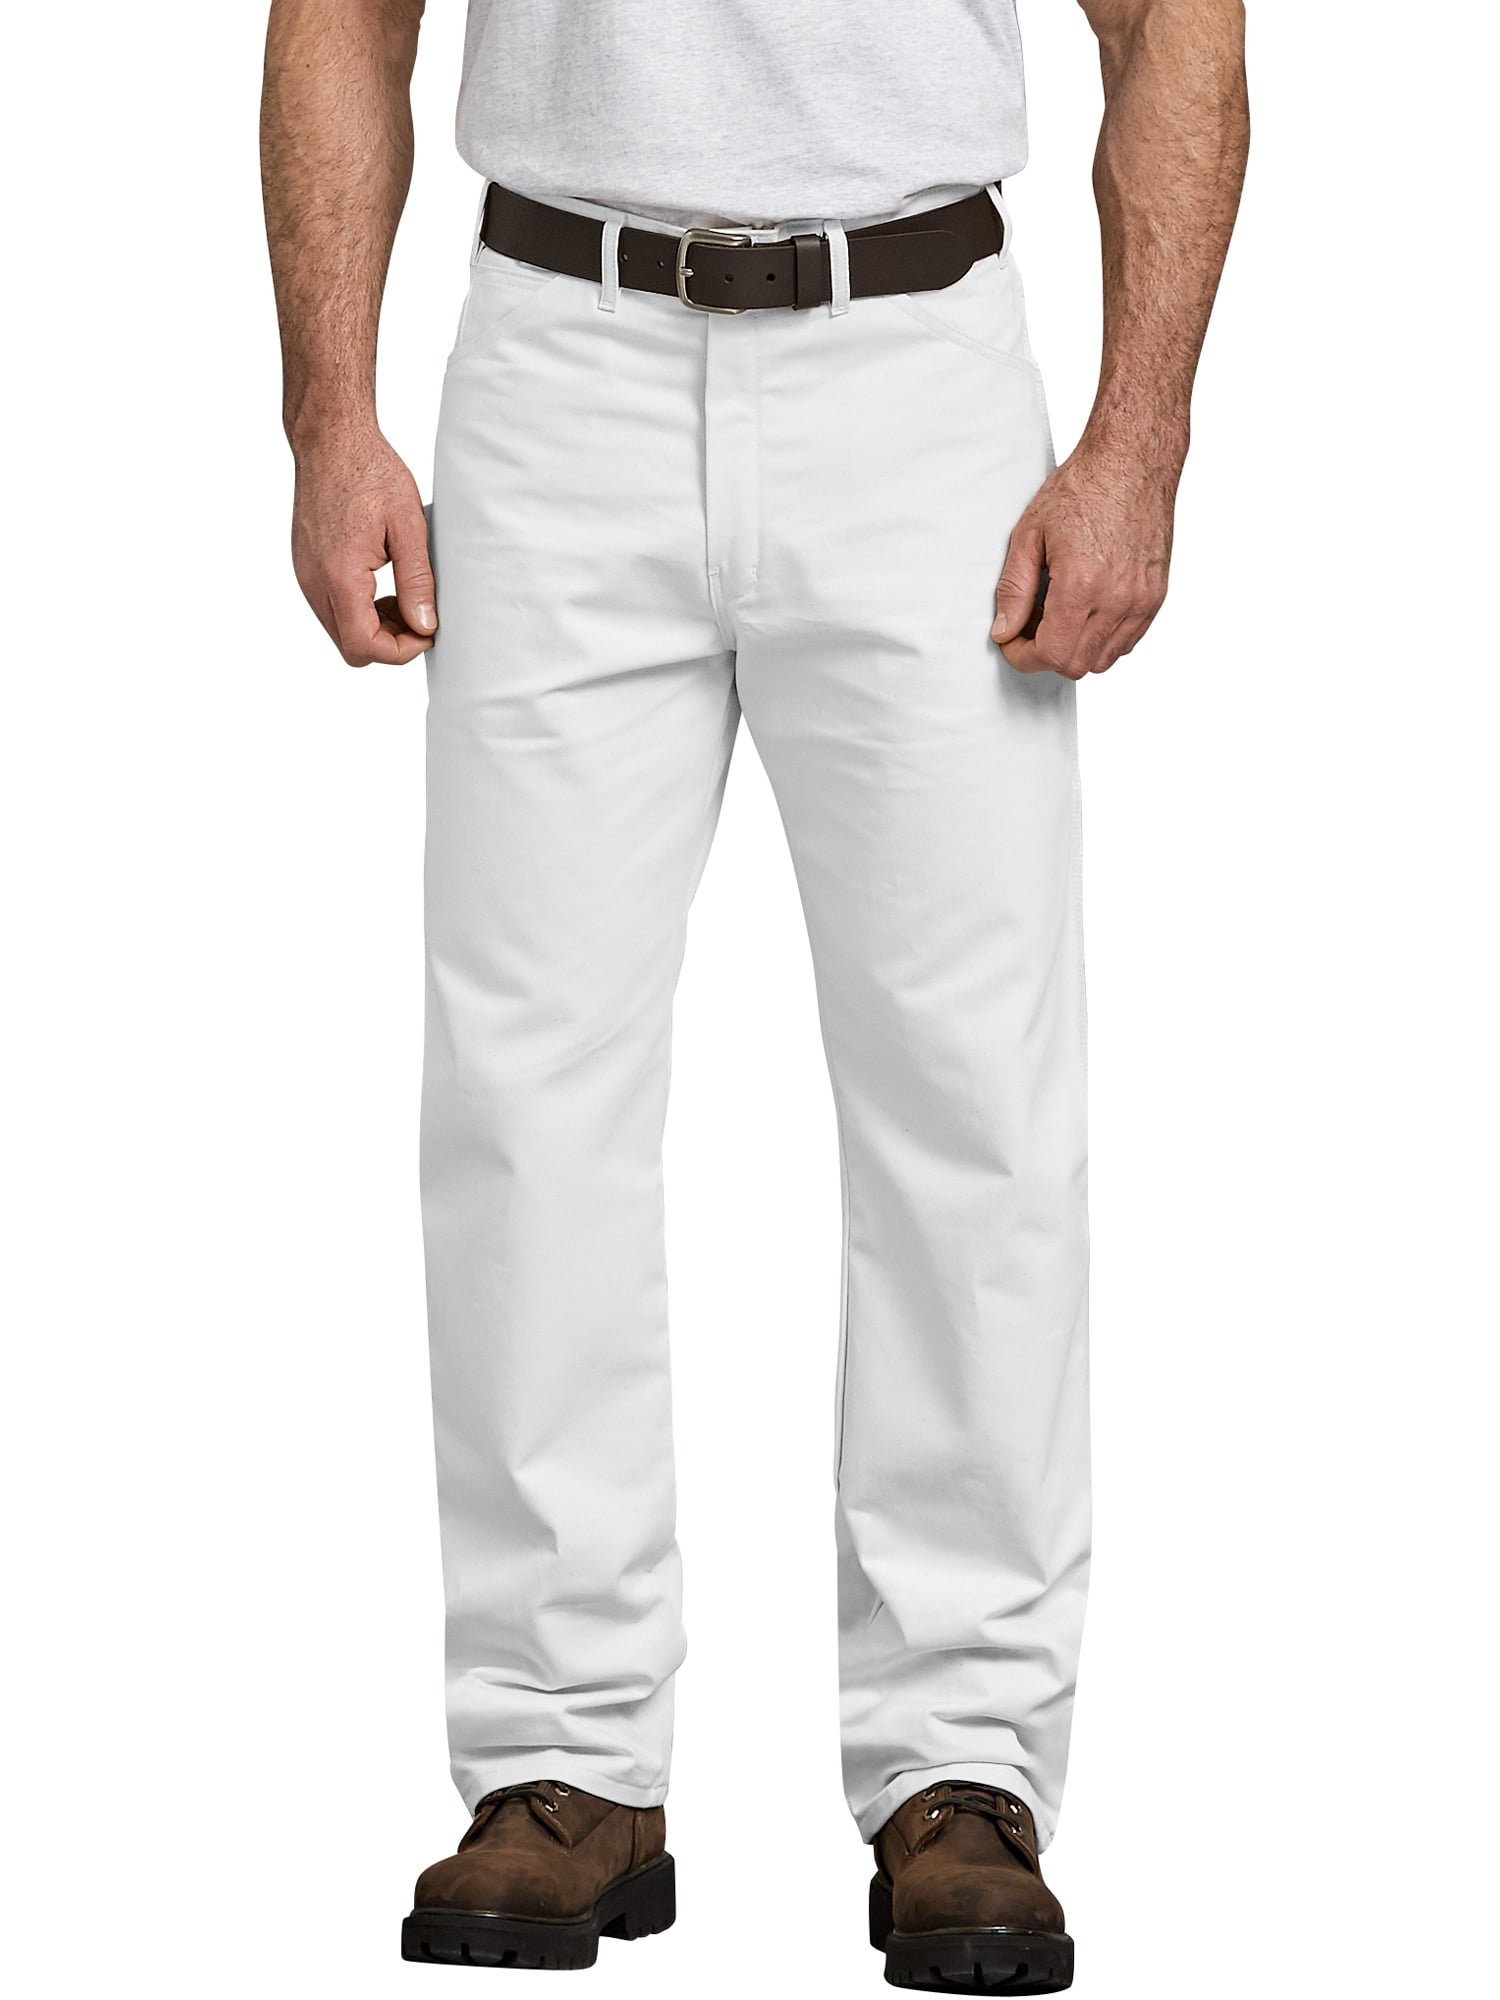 Edvintorg White Pants For Men Clearance Fashion Mens Work Pants Casual  Solid Fashion Cutton Zipper Pants Mid Waist Straight Trousers  Walmartcom